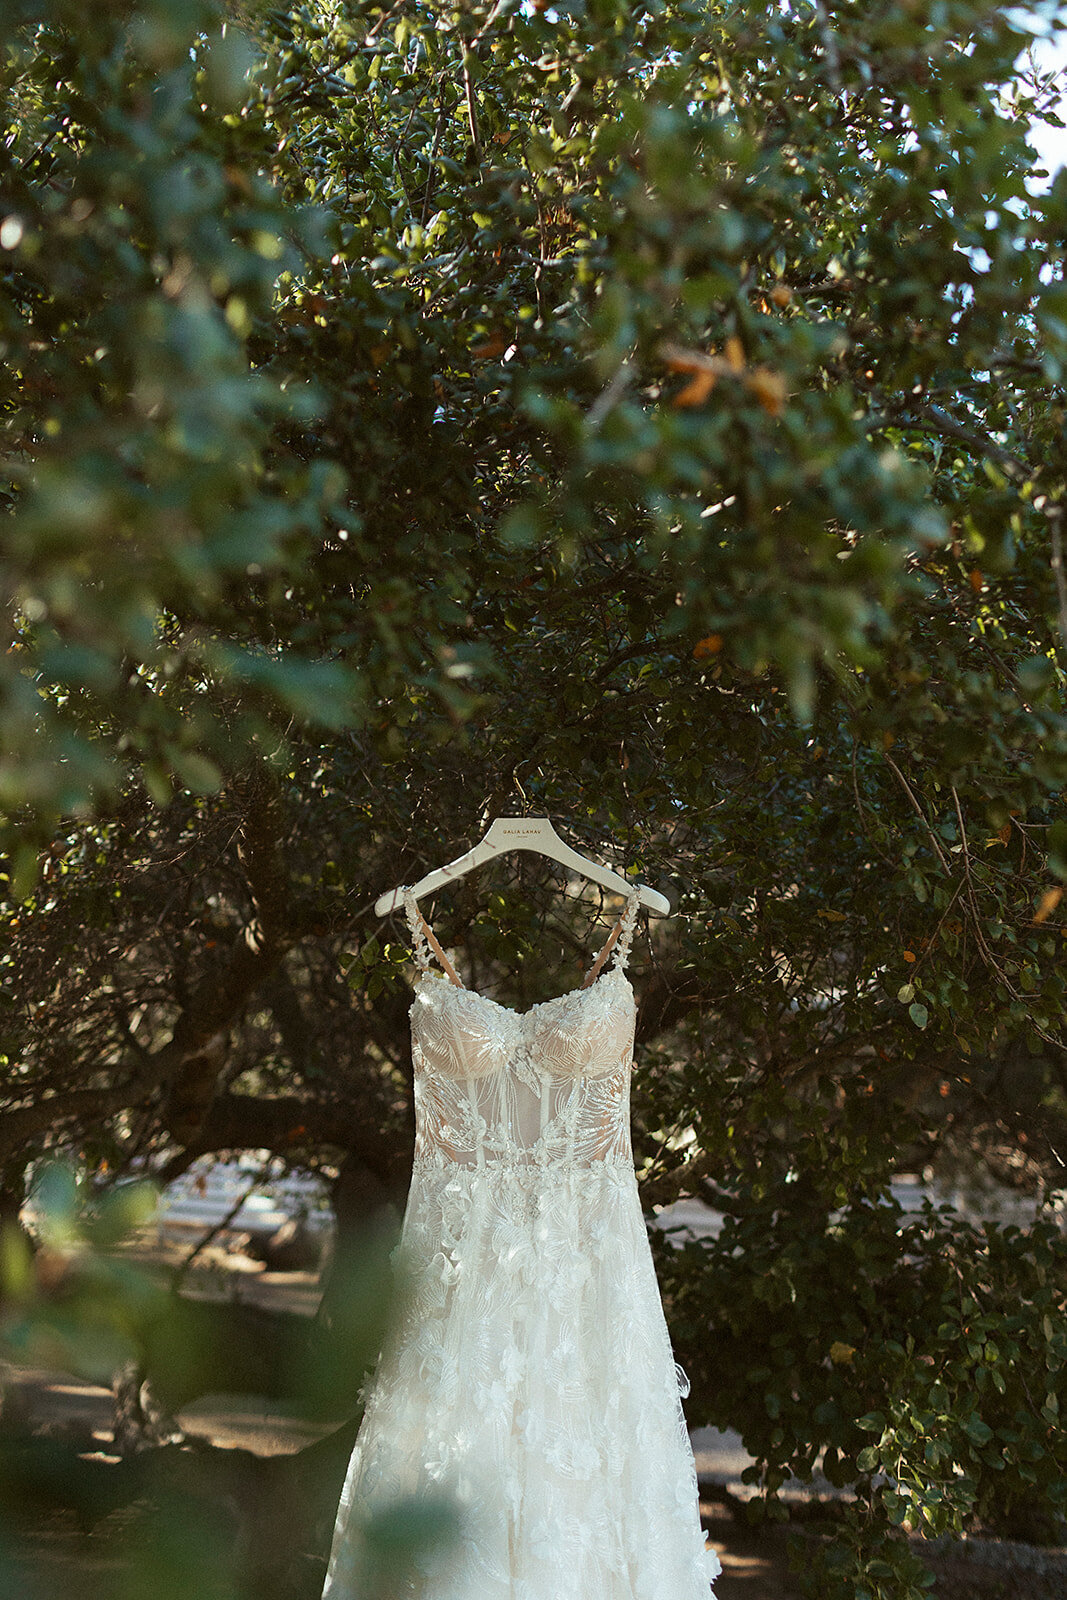 wedding dress hanging from a tree